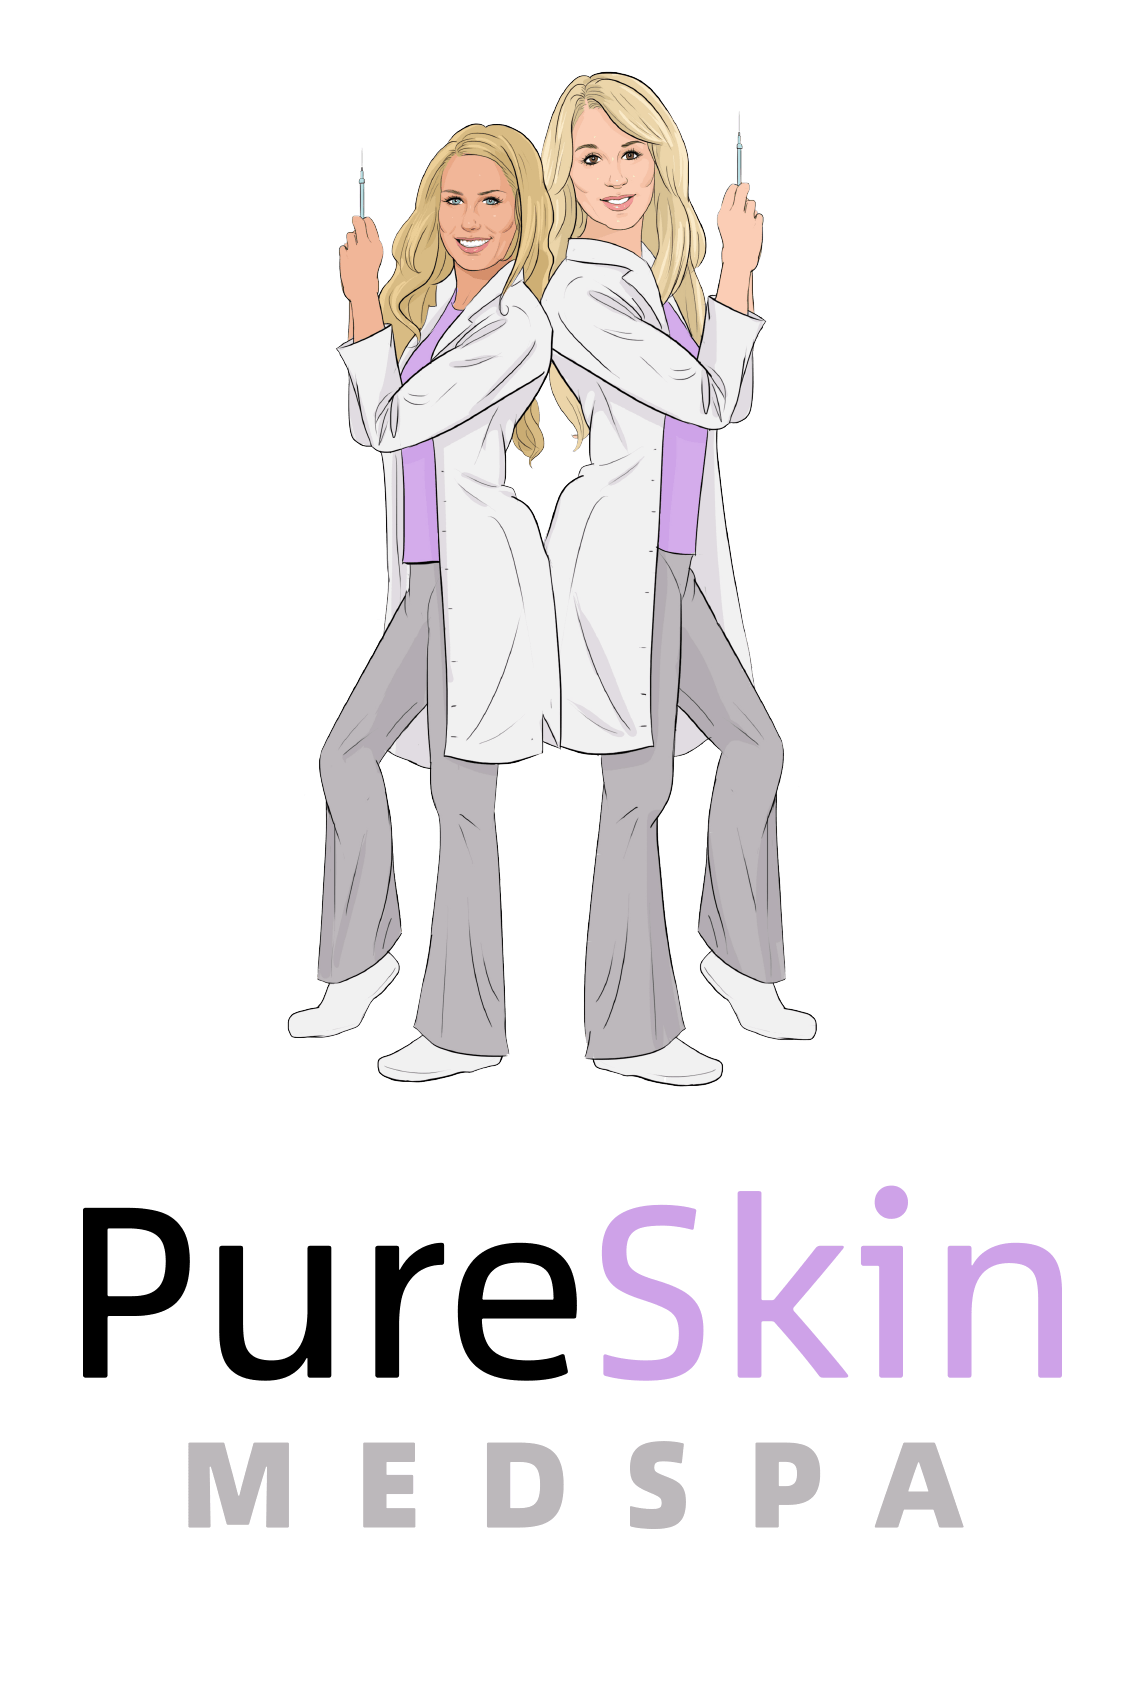 Pure Skin MedSpa - Skin Care Clinic in Southington, CT